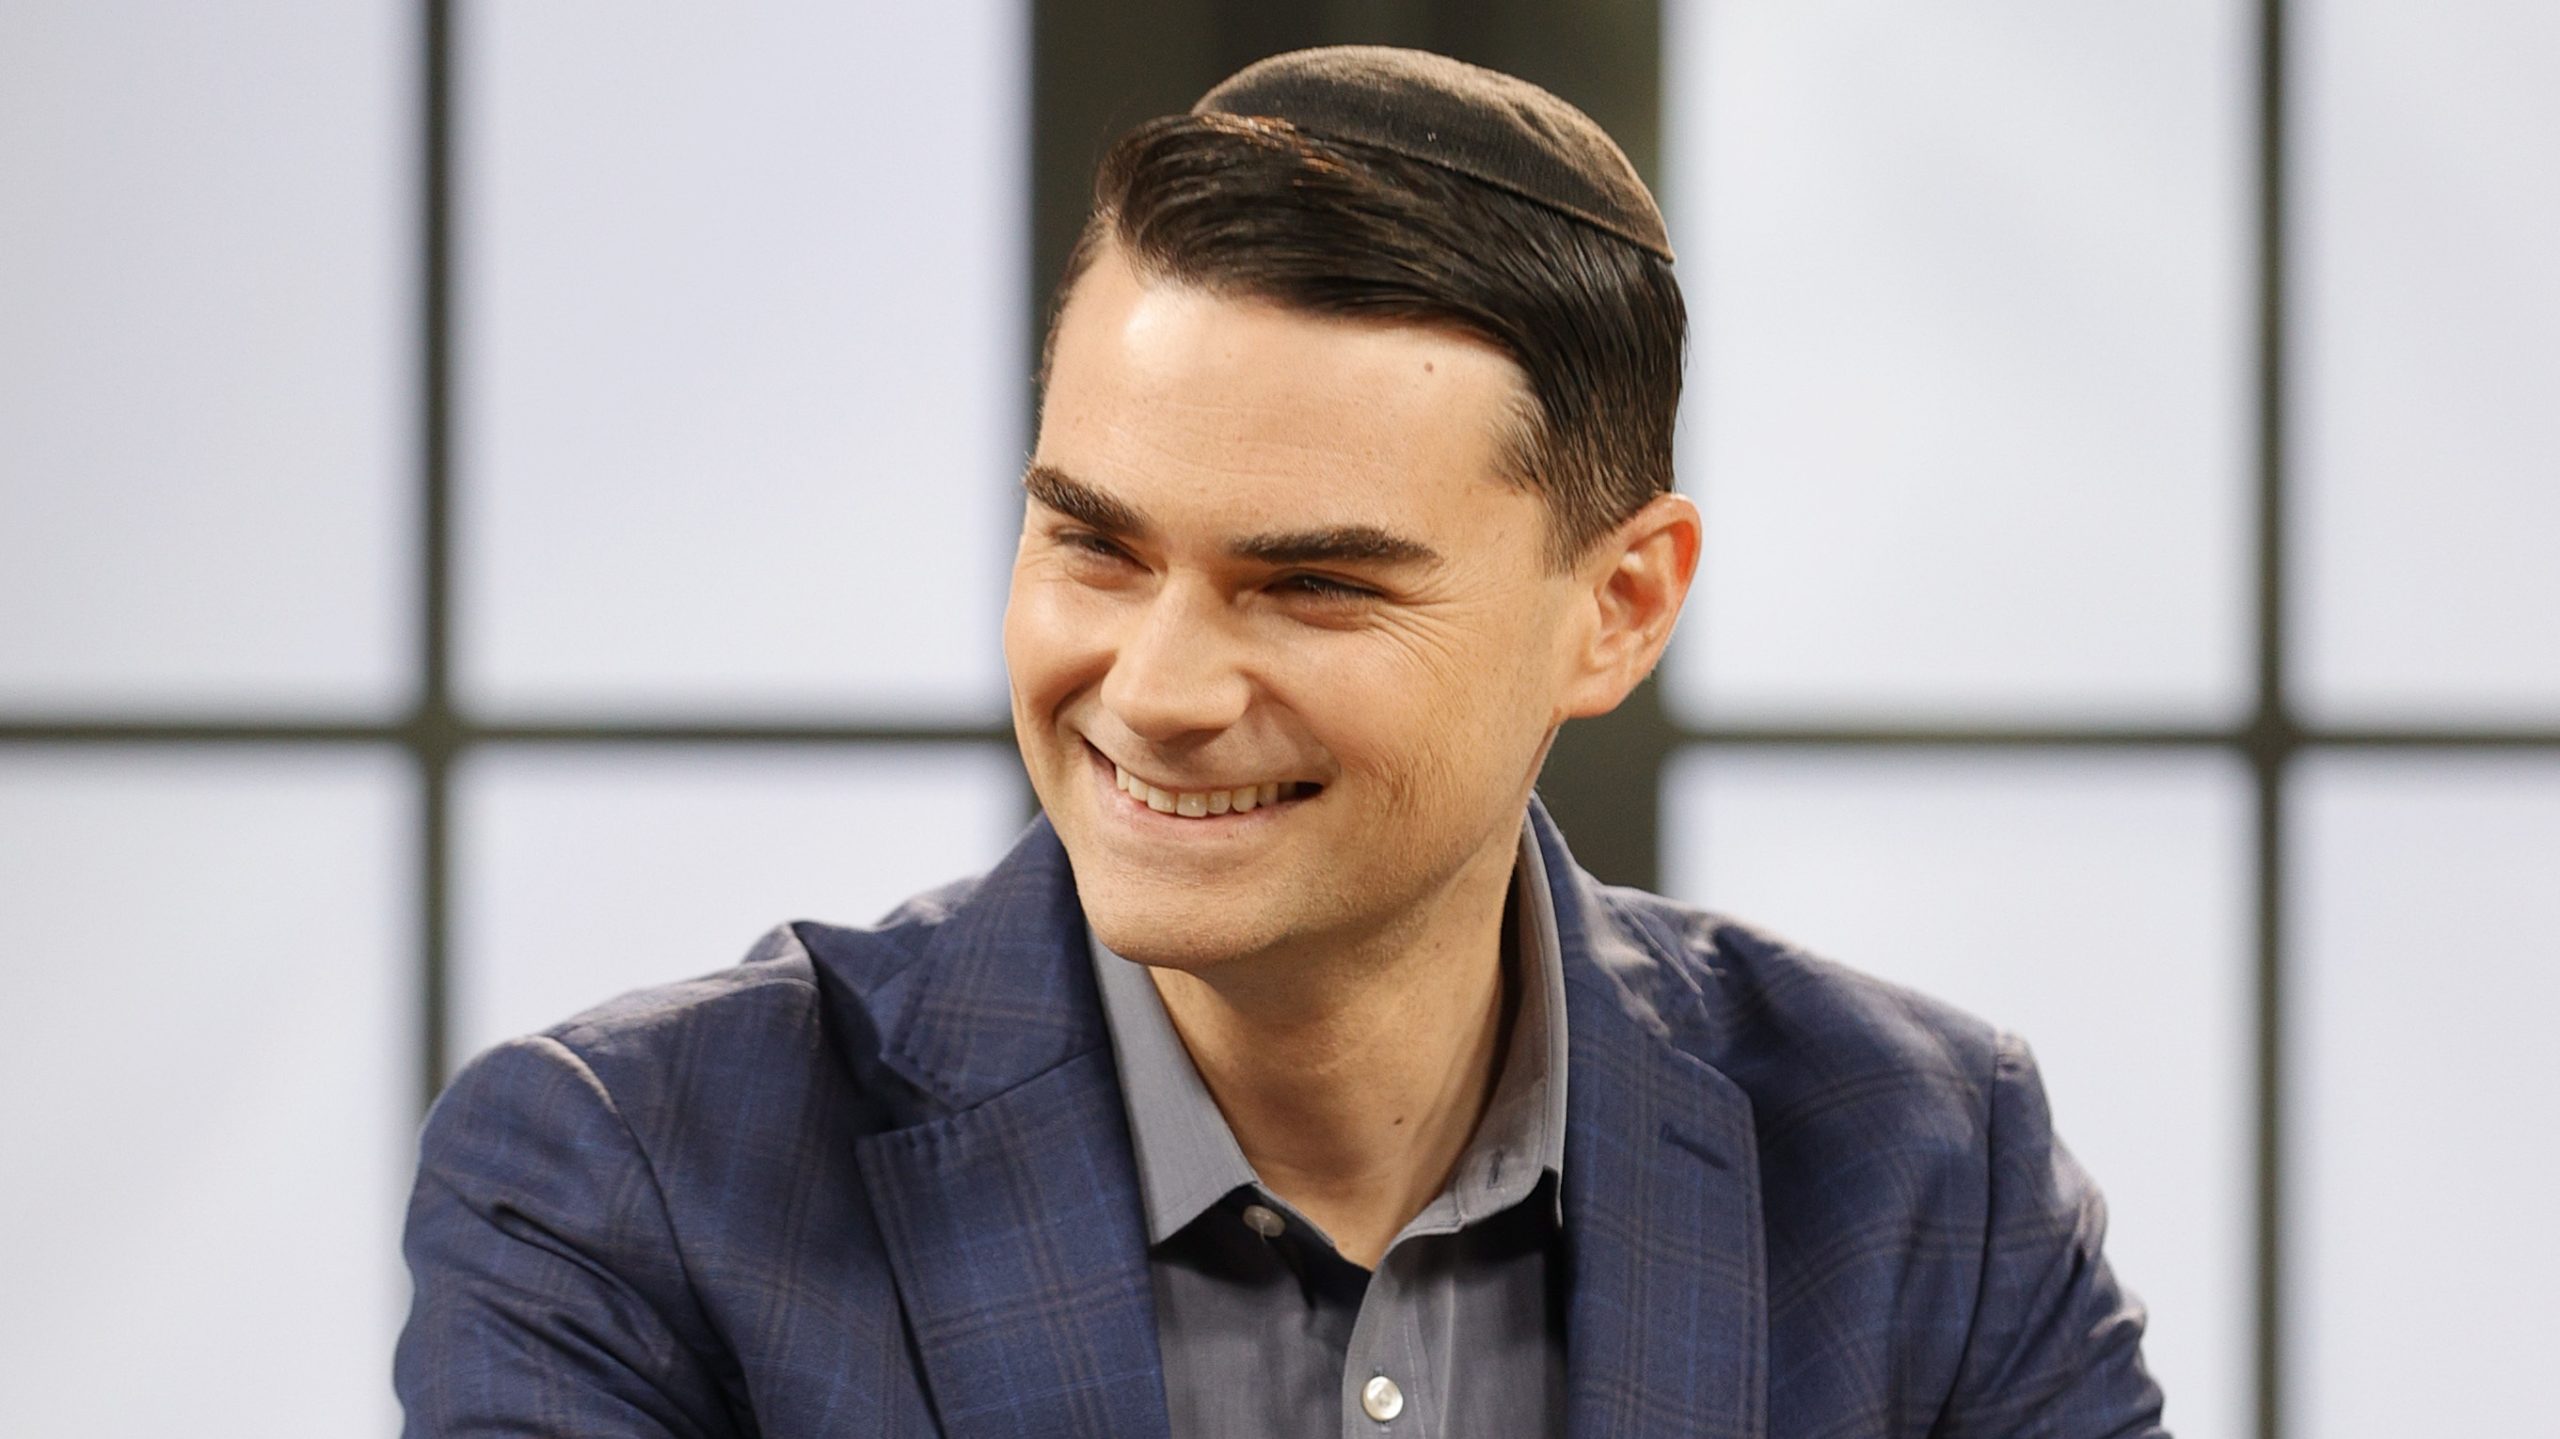 Brett Cooper Ben Shapiro: Exploring the Intersection of Ideas and Influence